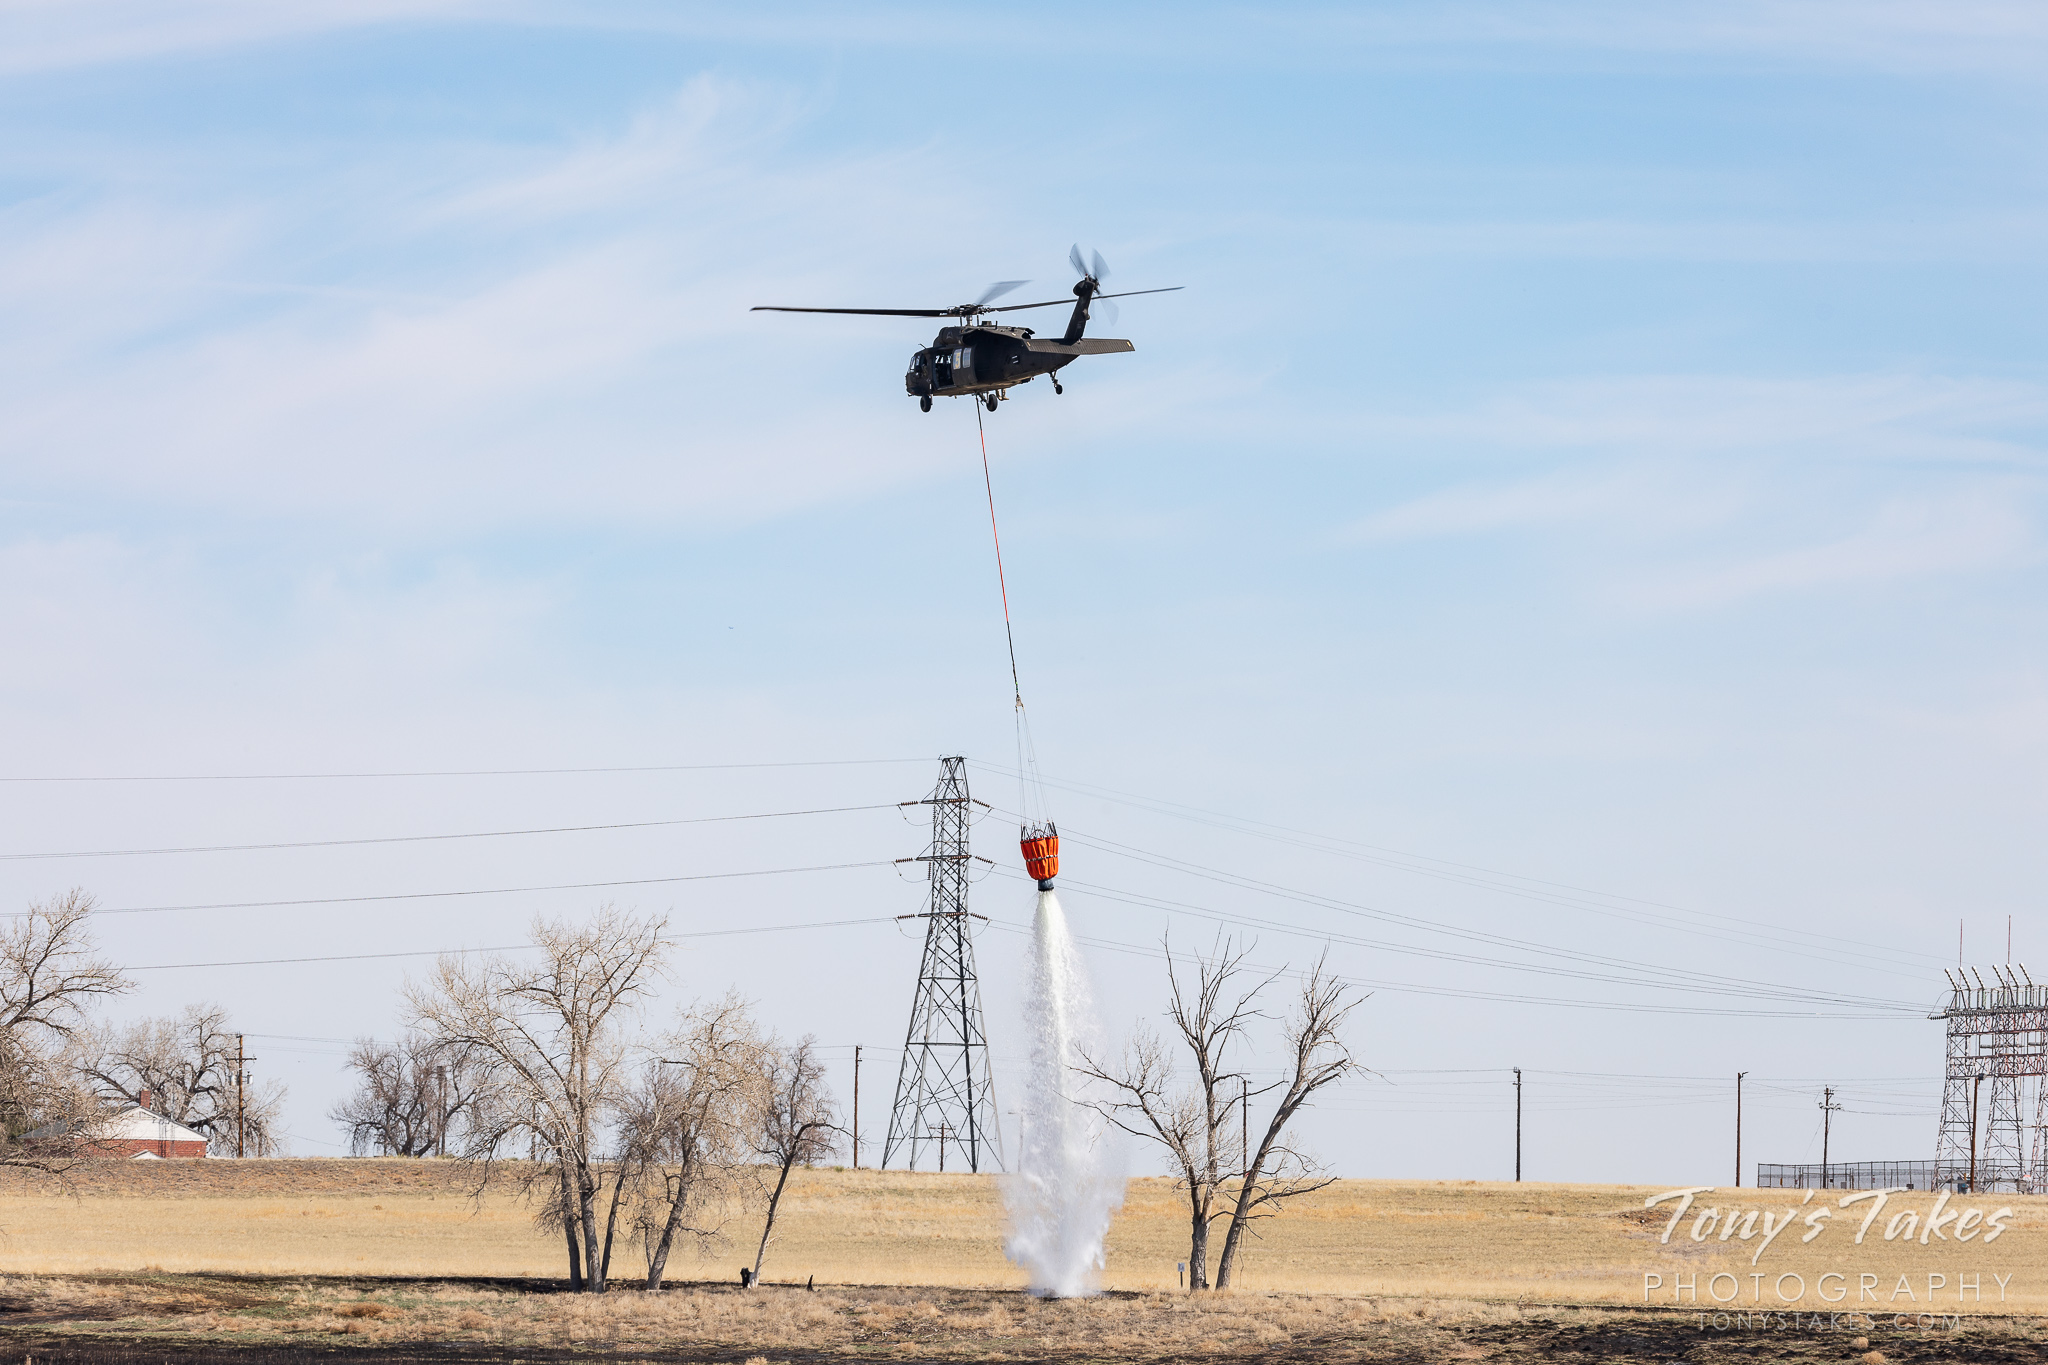 A UH-60 Blackhawk from the Colorado National Guard practices firefighting. (© Tony’s Takes)